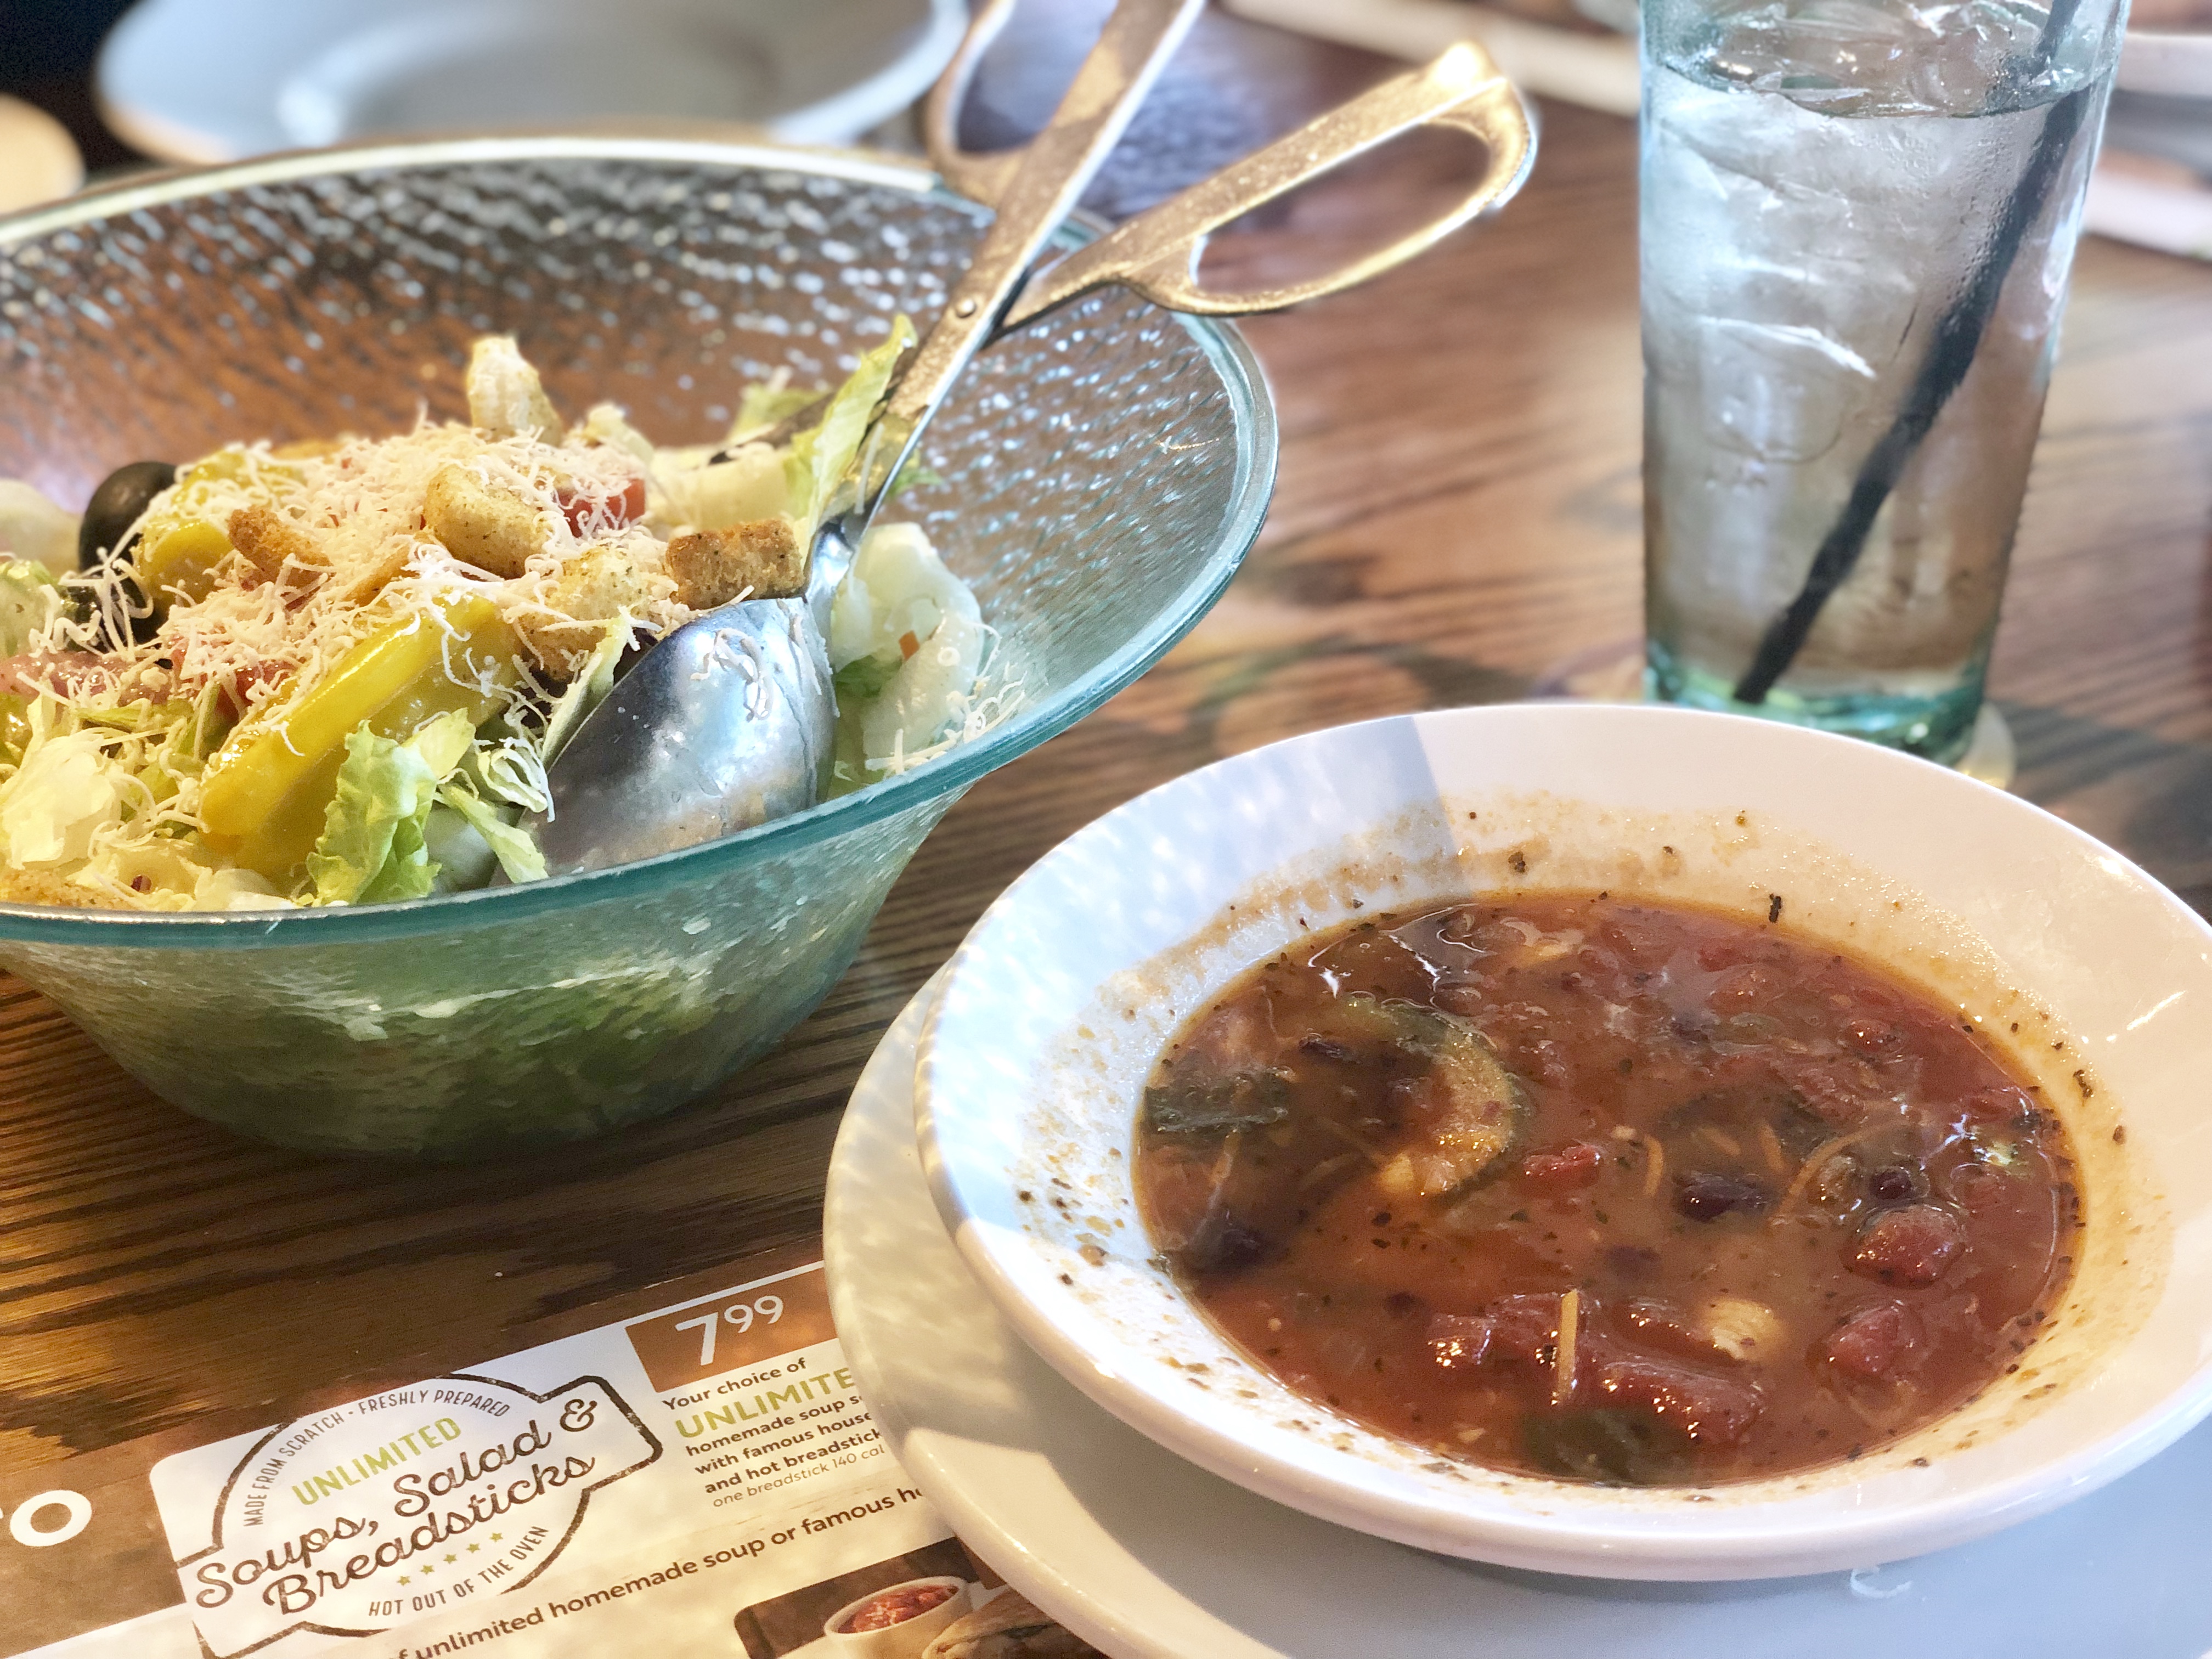 Best Olive Garden Coupons Deals This Week The Krazy Coupon Lady